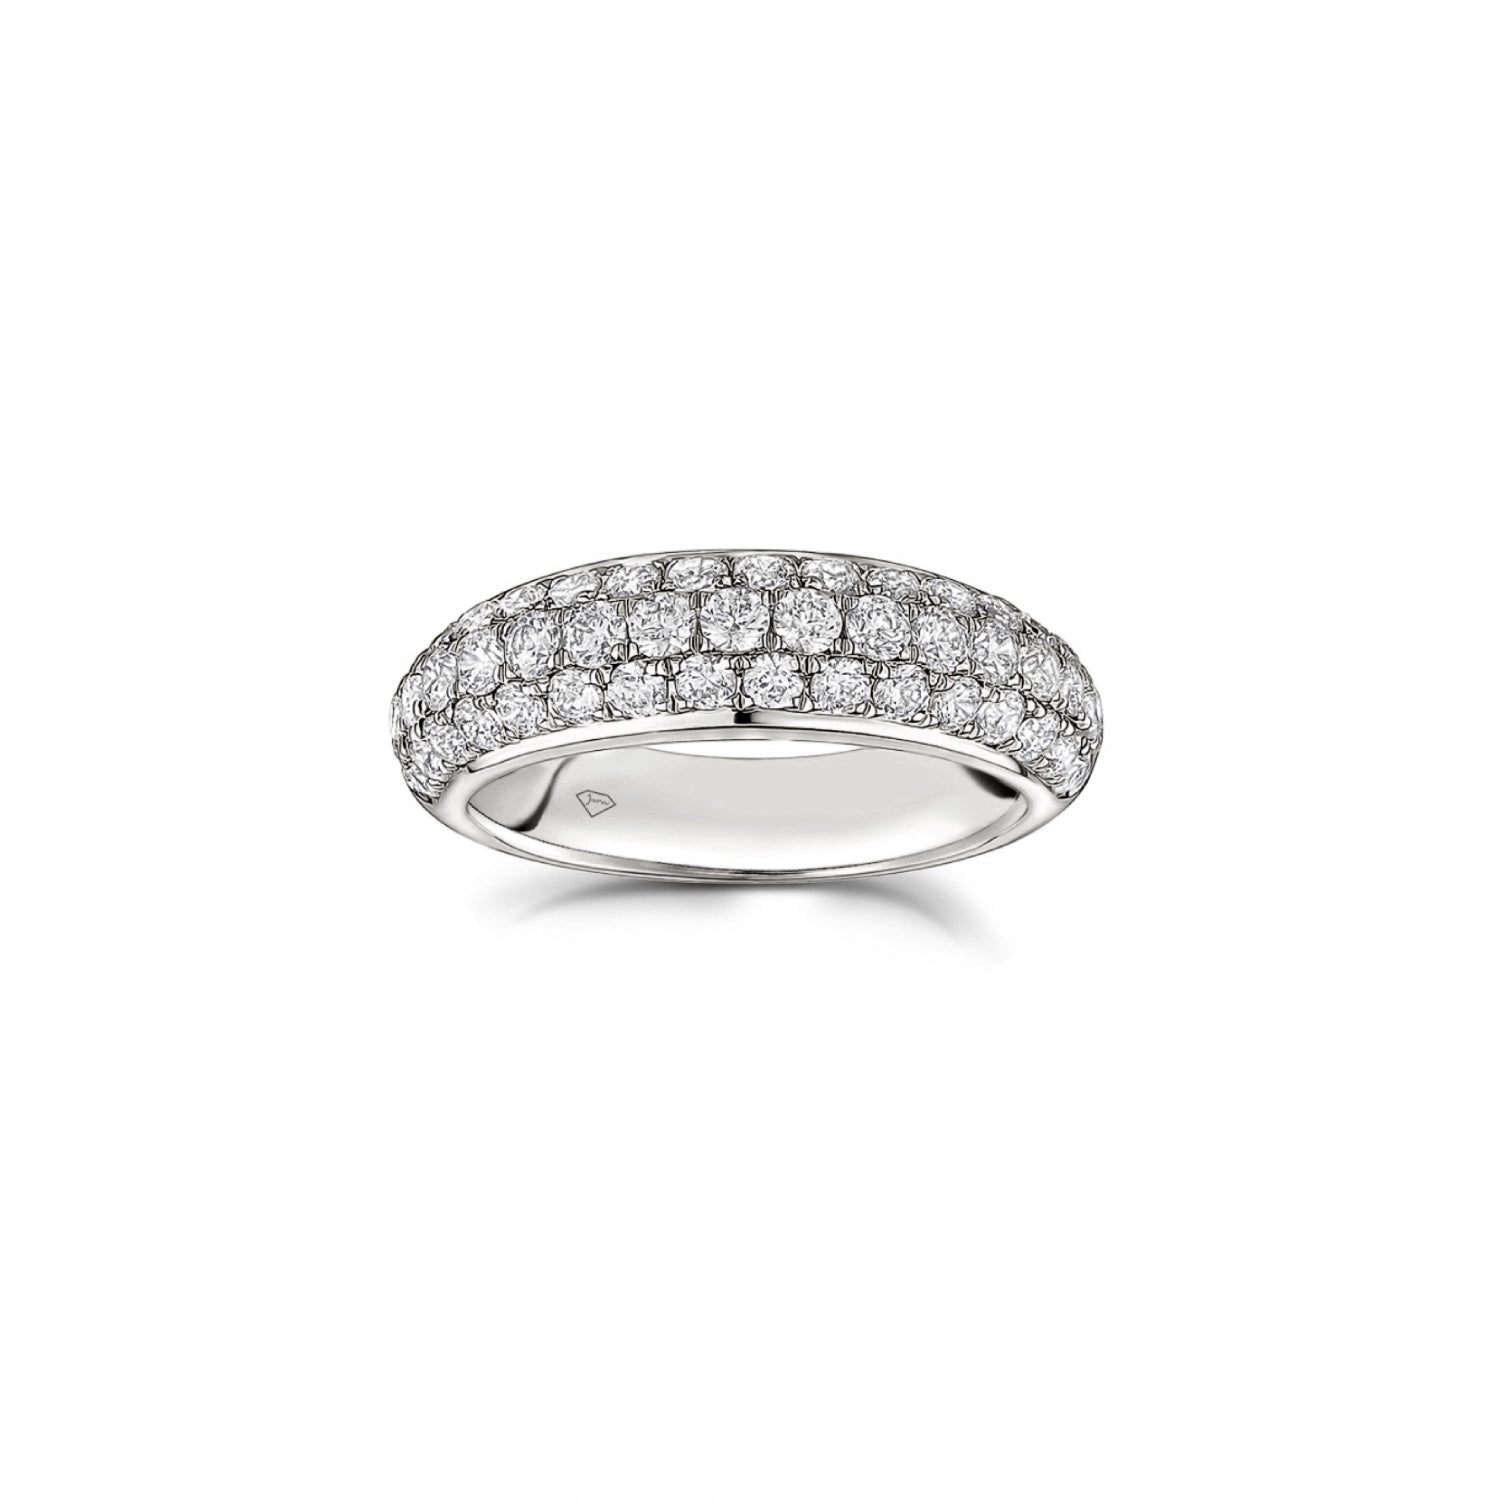 Three-Row Diamond Pavé Domed Ring in White Gold